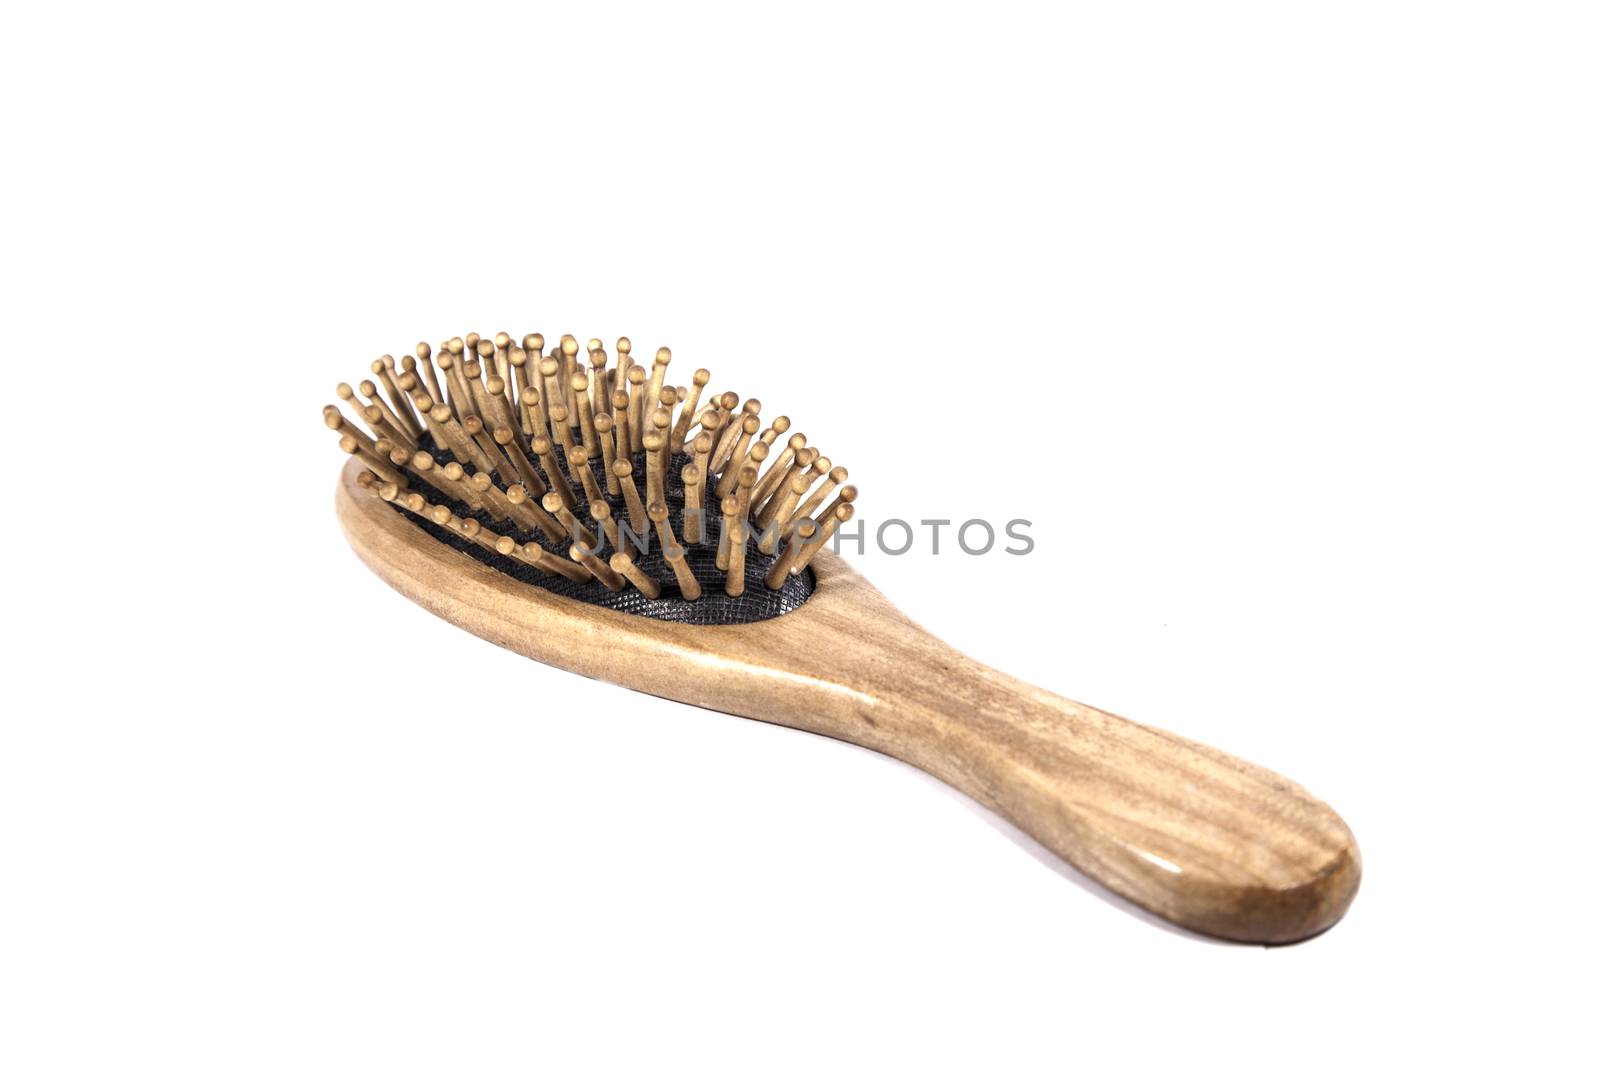 Comb a for hair isolated on white background